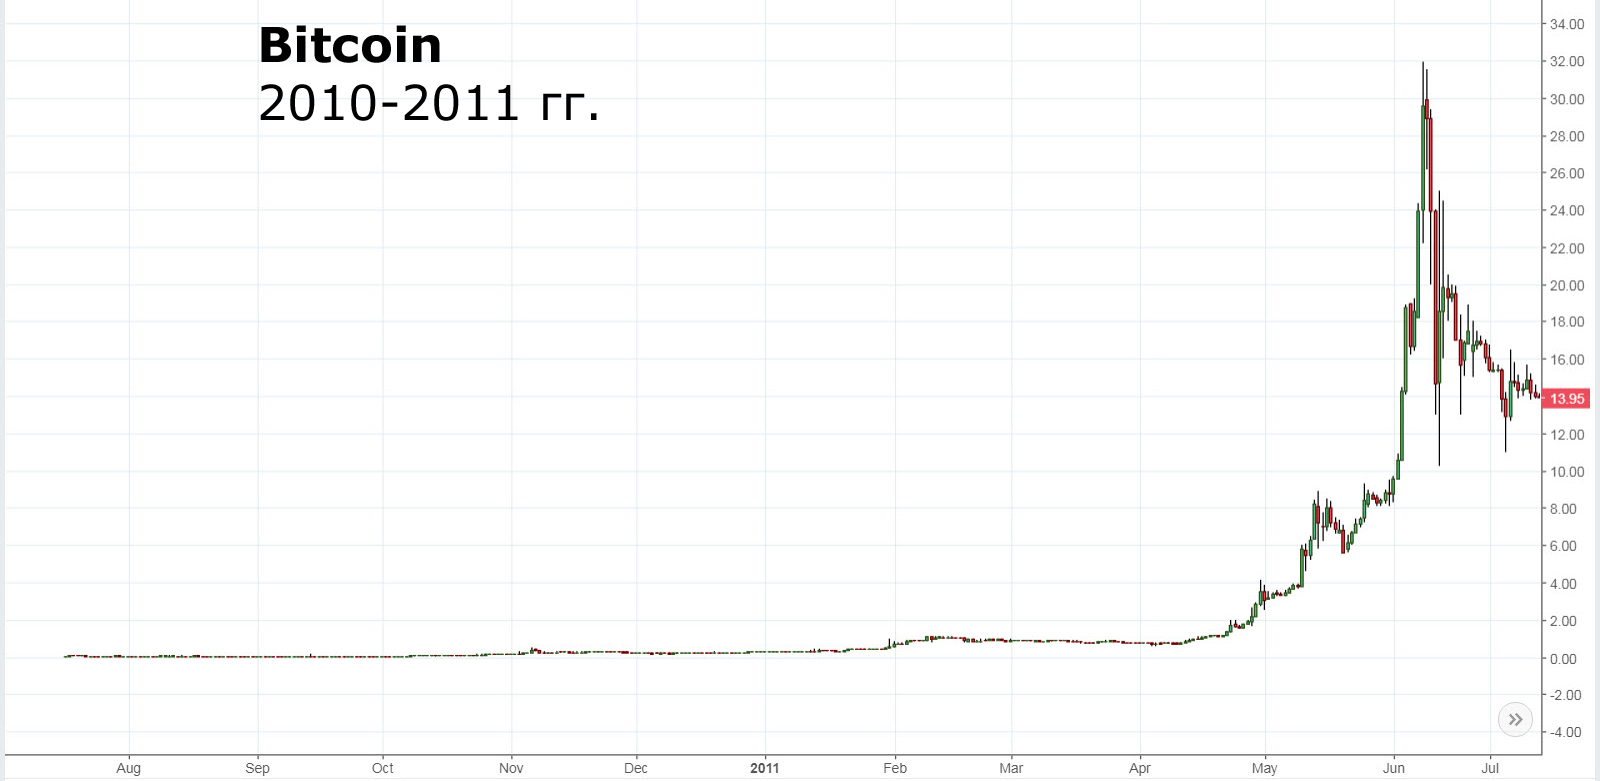 100 of bitcoin in 2010